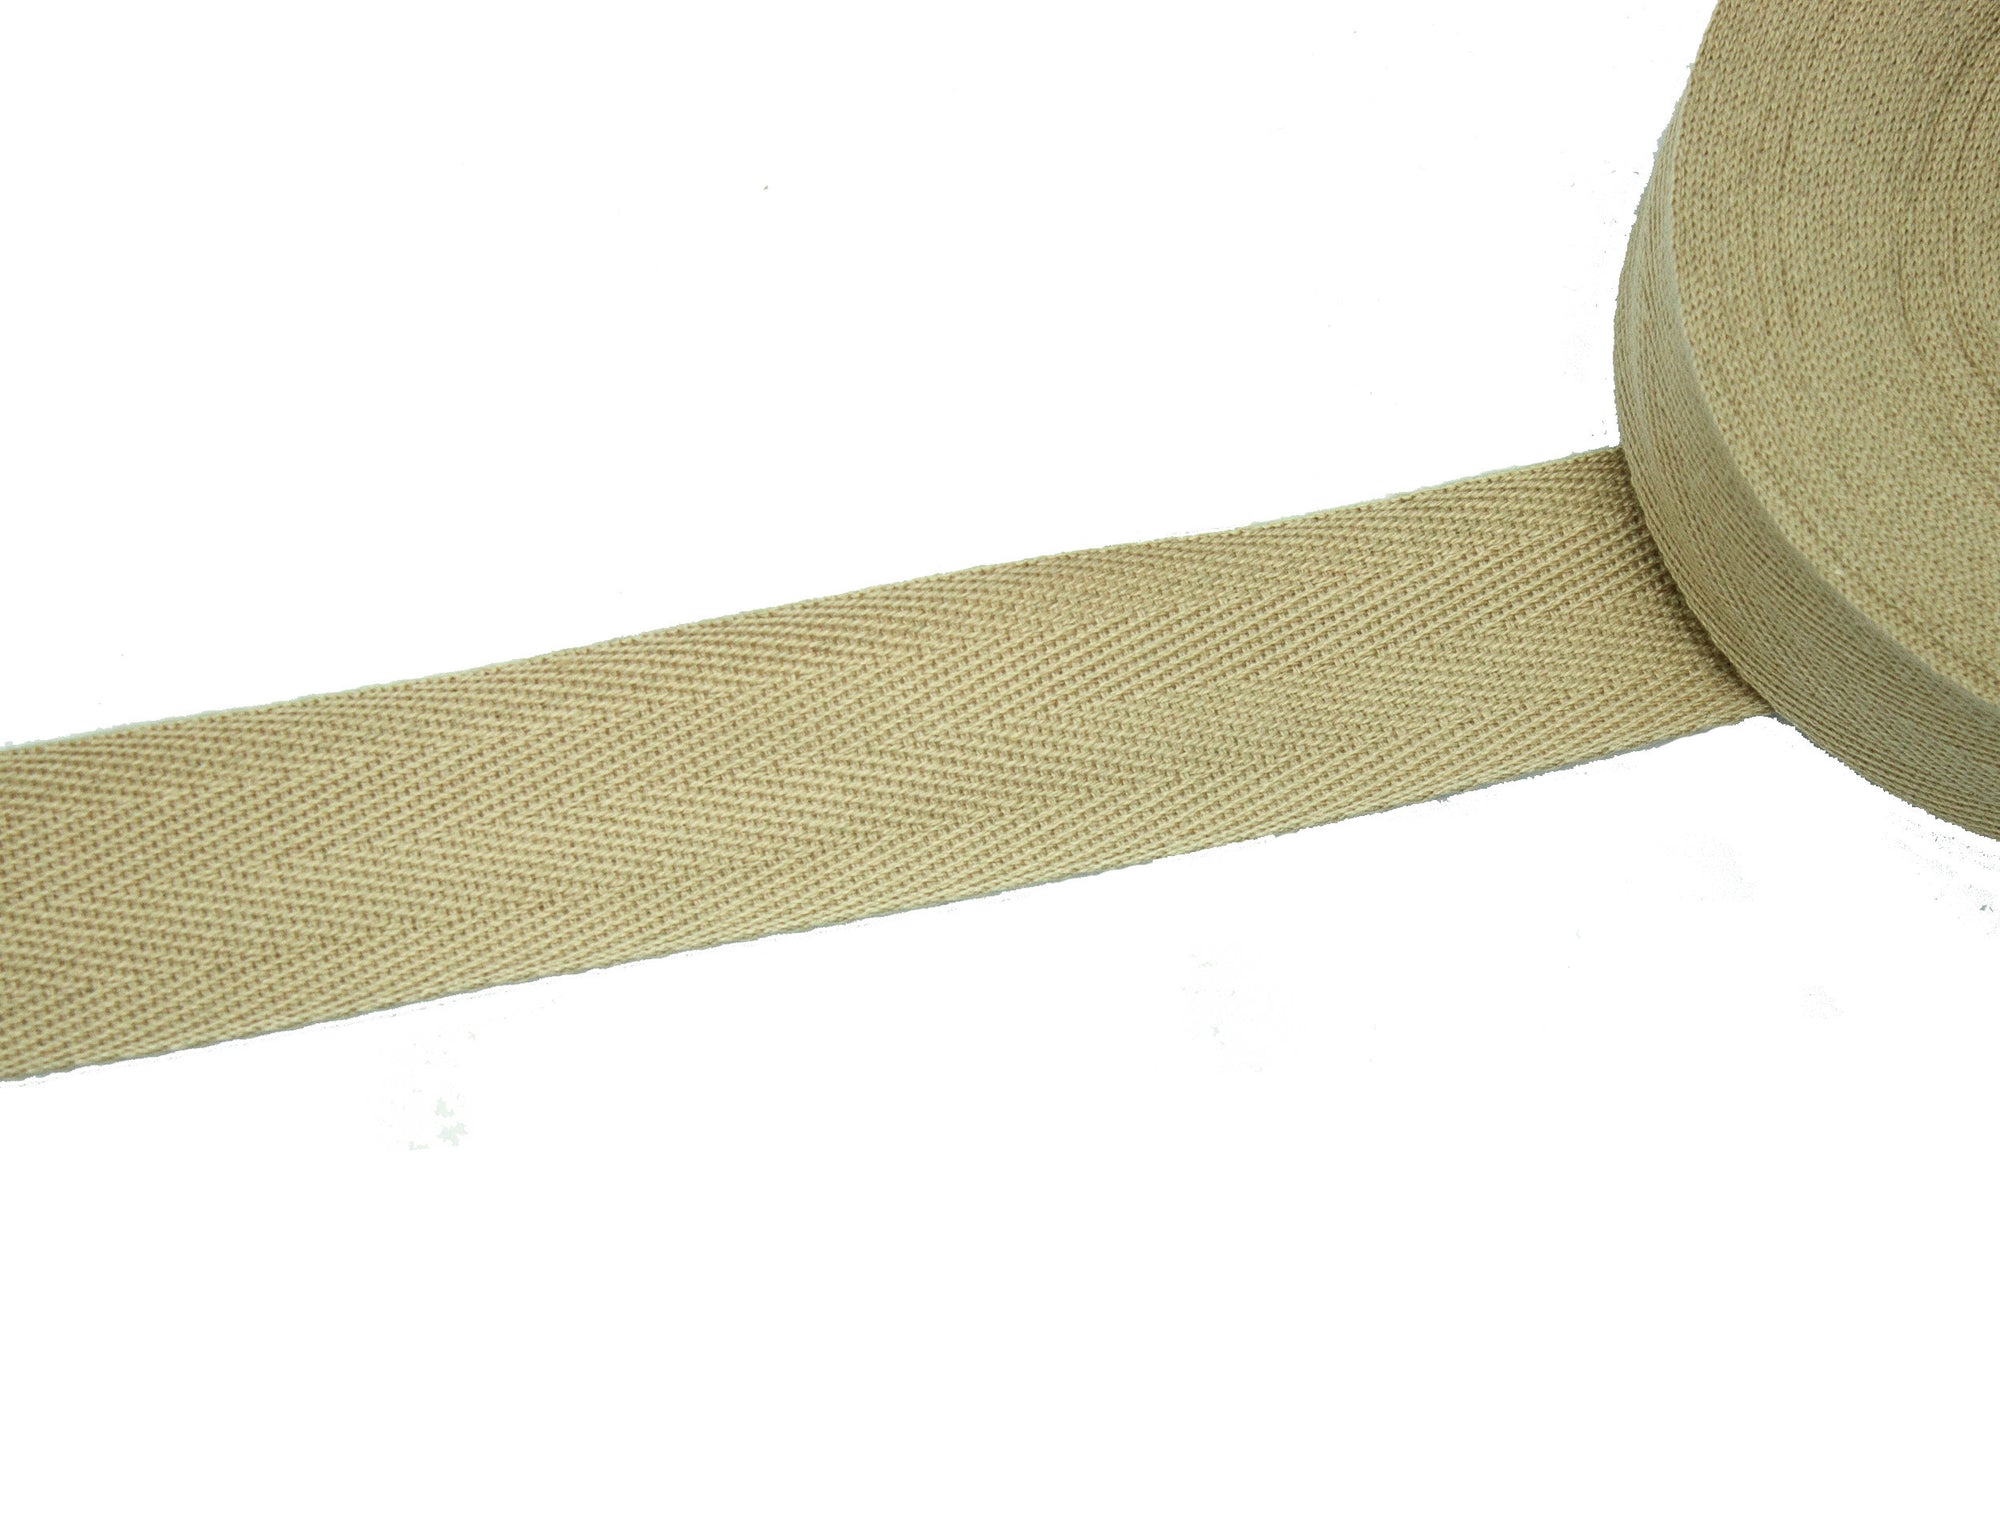 Twill Edging or Strapping Measures 30 mm Wide - Sold by the Yard